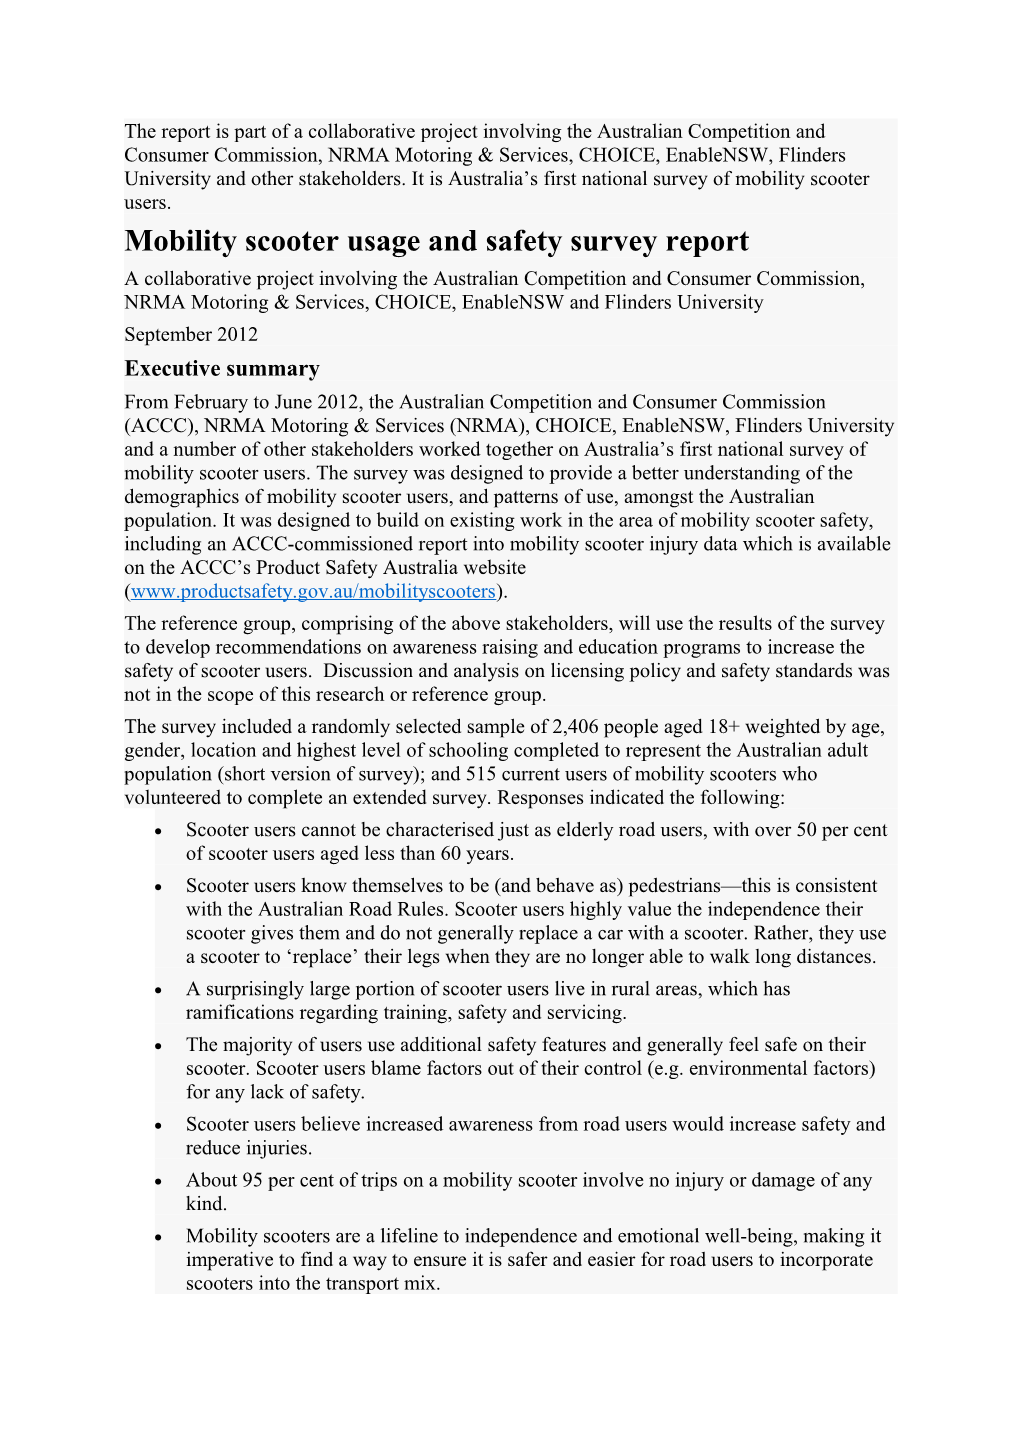 Mobility Scooter Usage and Safety Survey Report